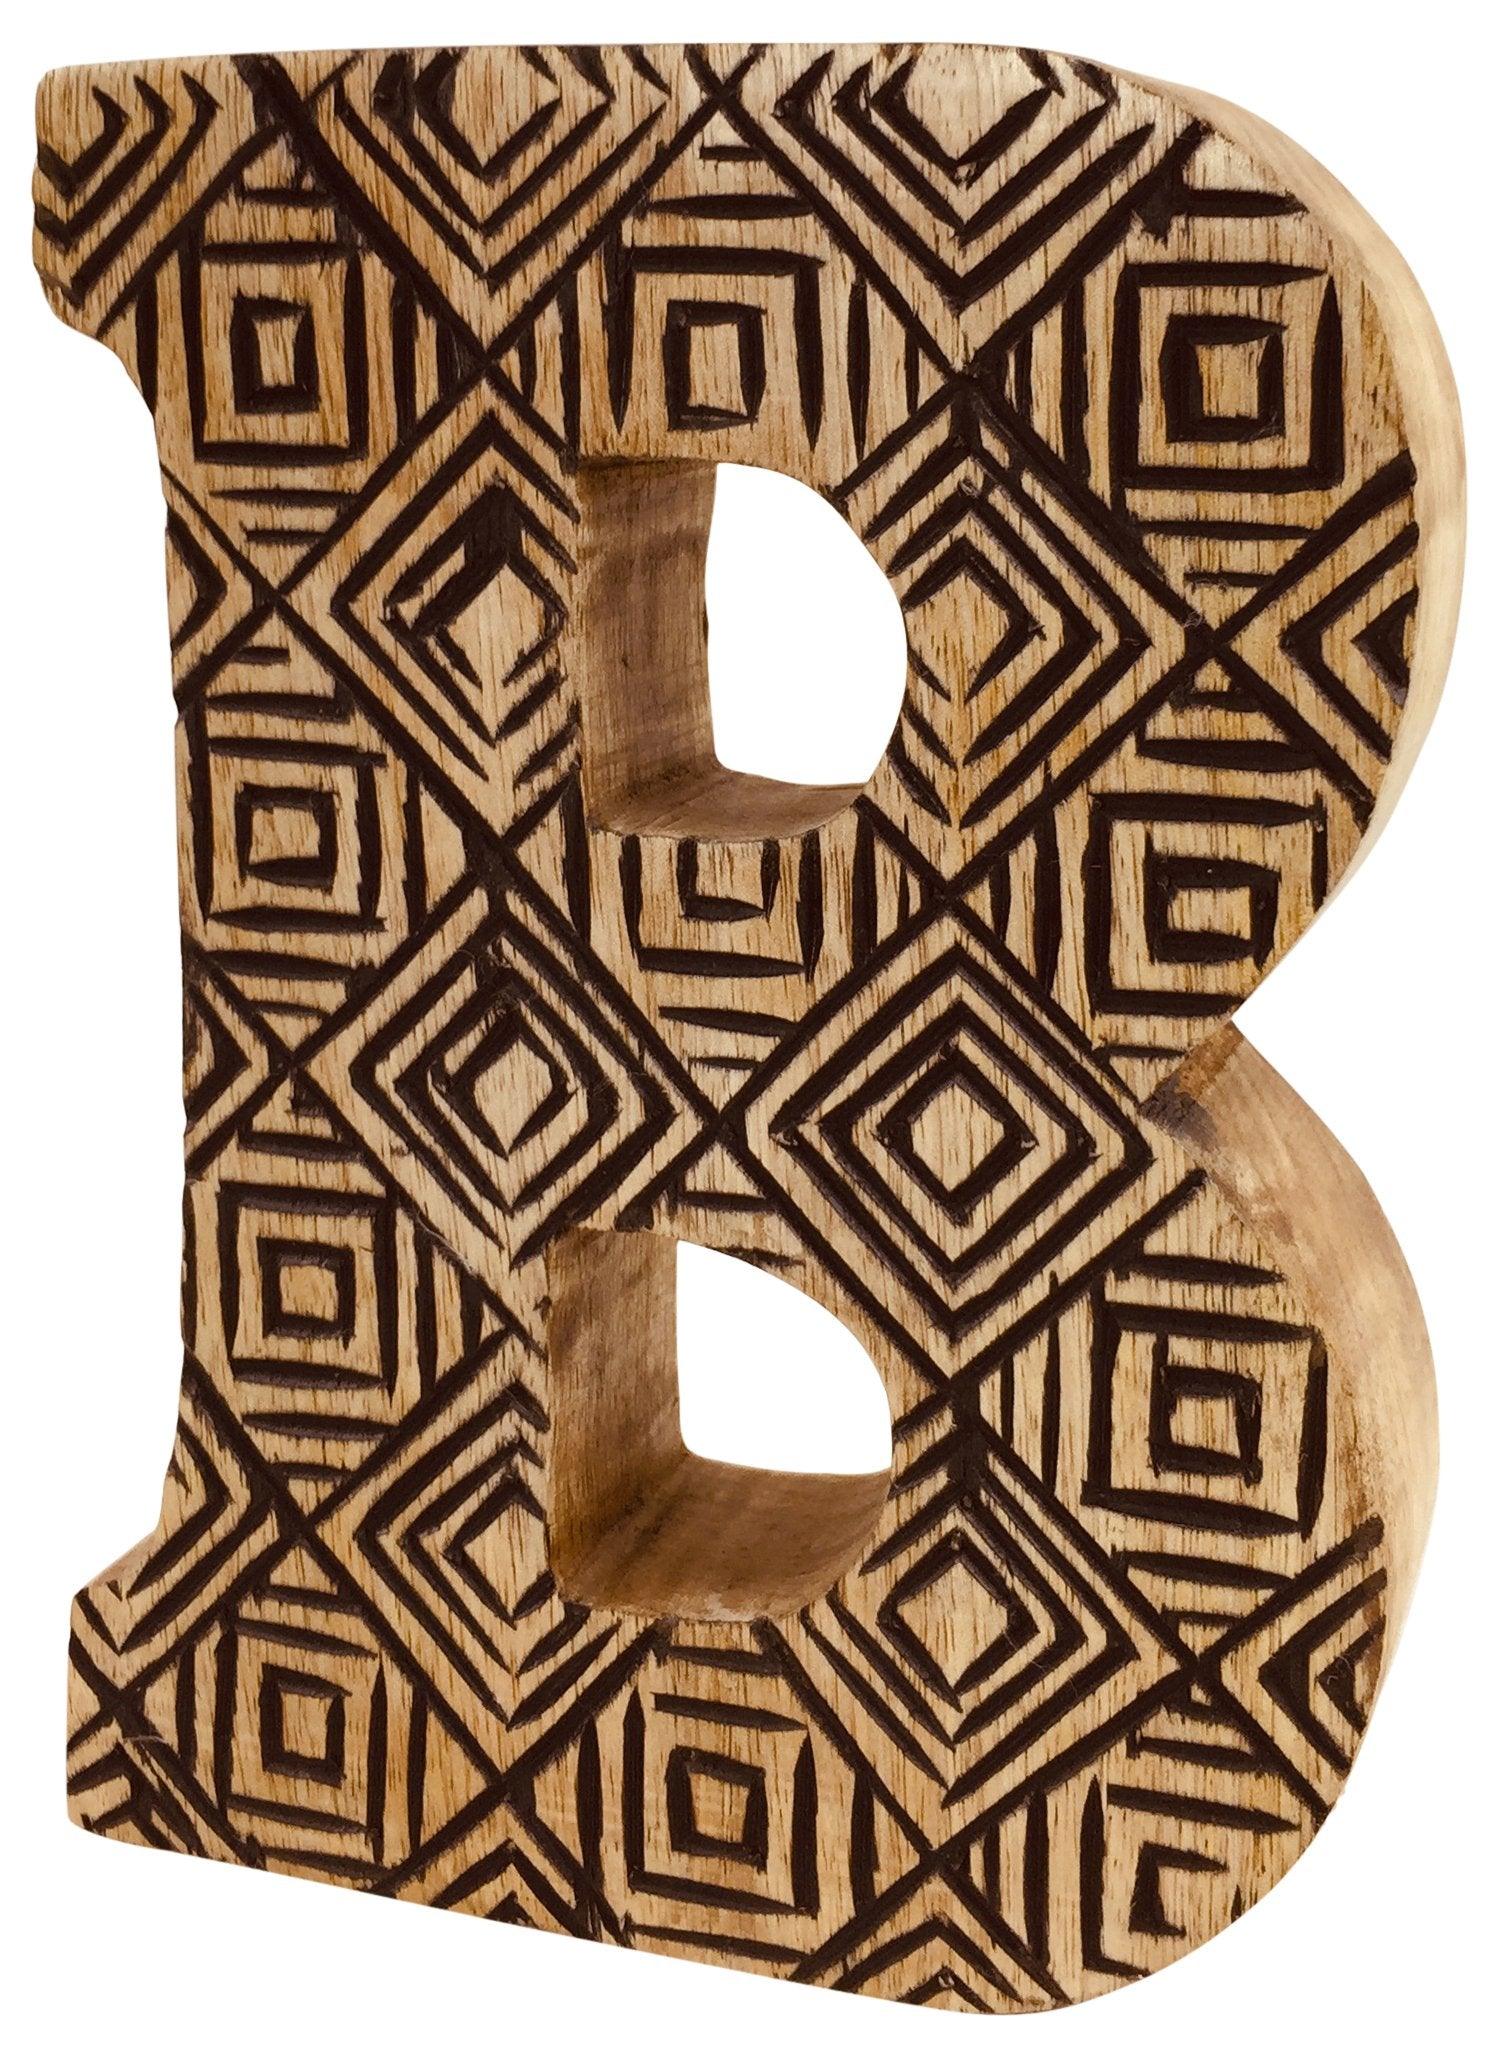 View Hand Carved Wooden Geometric Letter B information